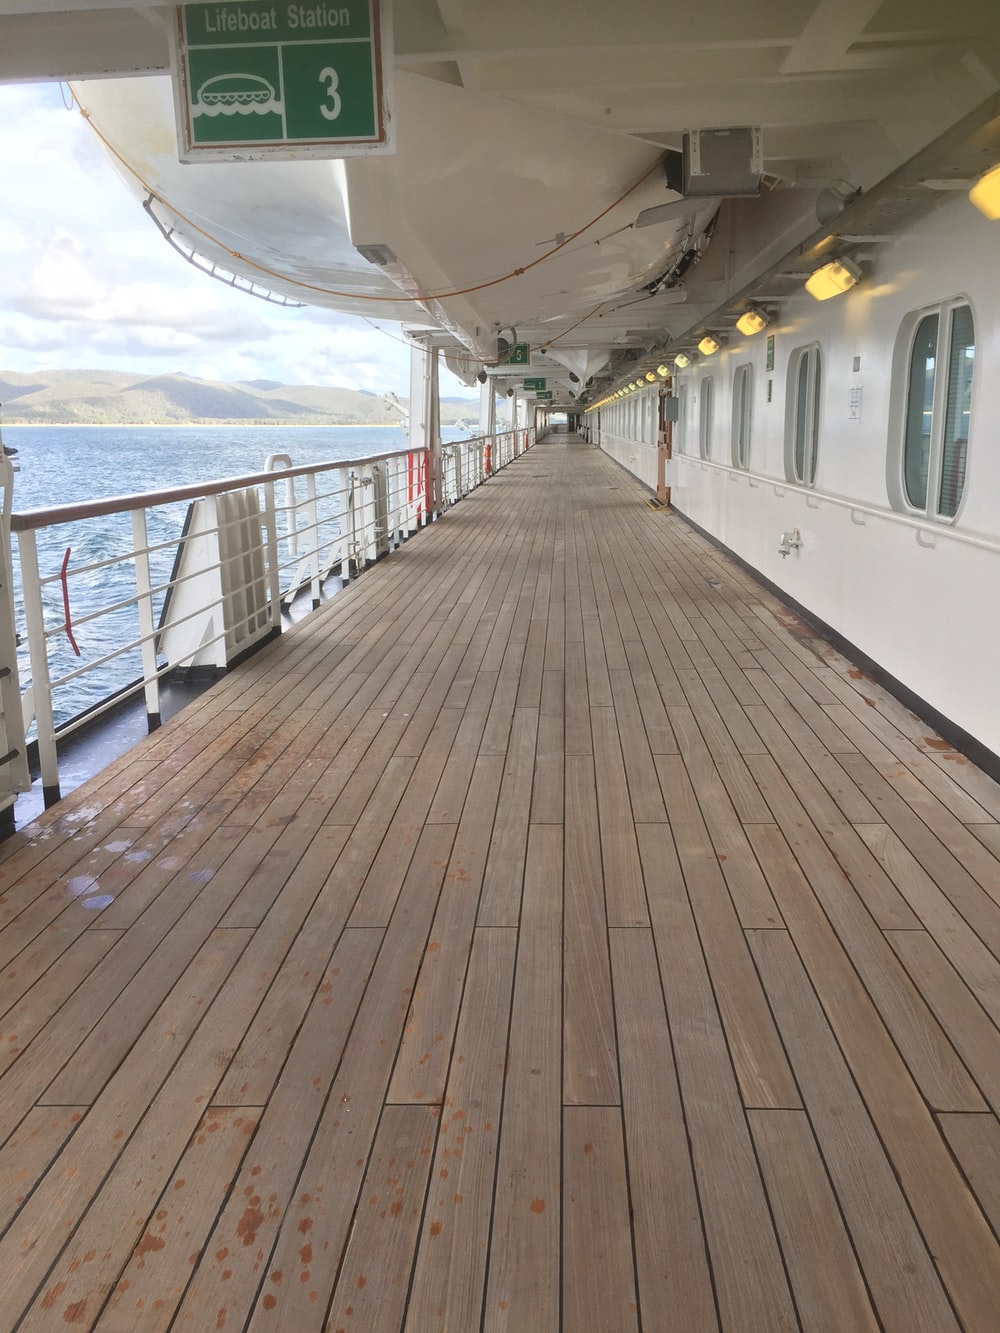 Ship Deck Picture. Download Free Image